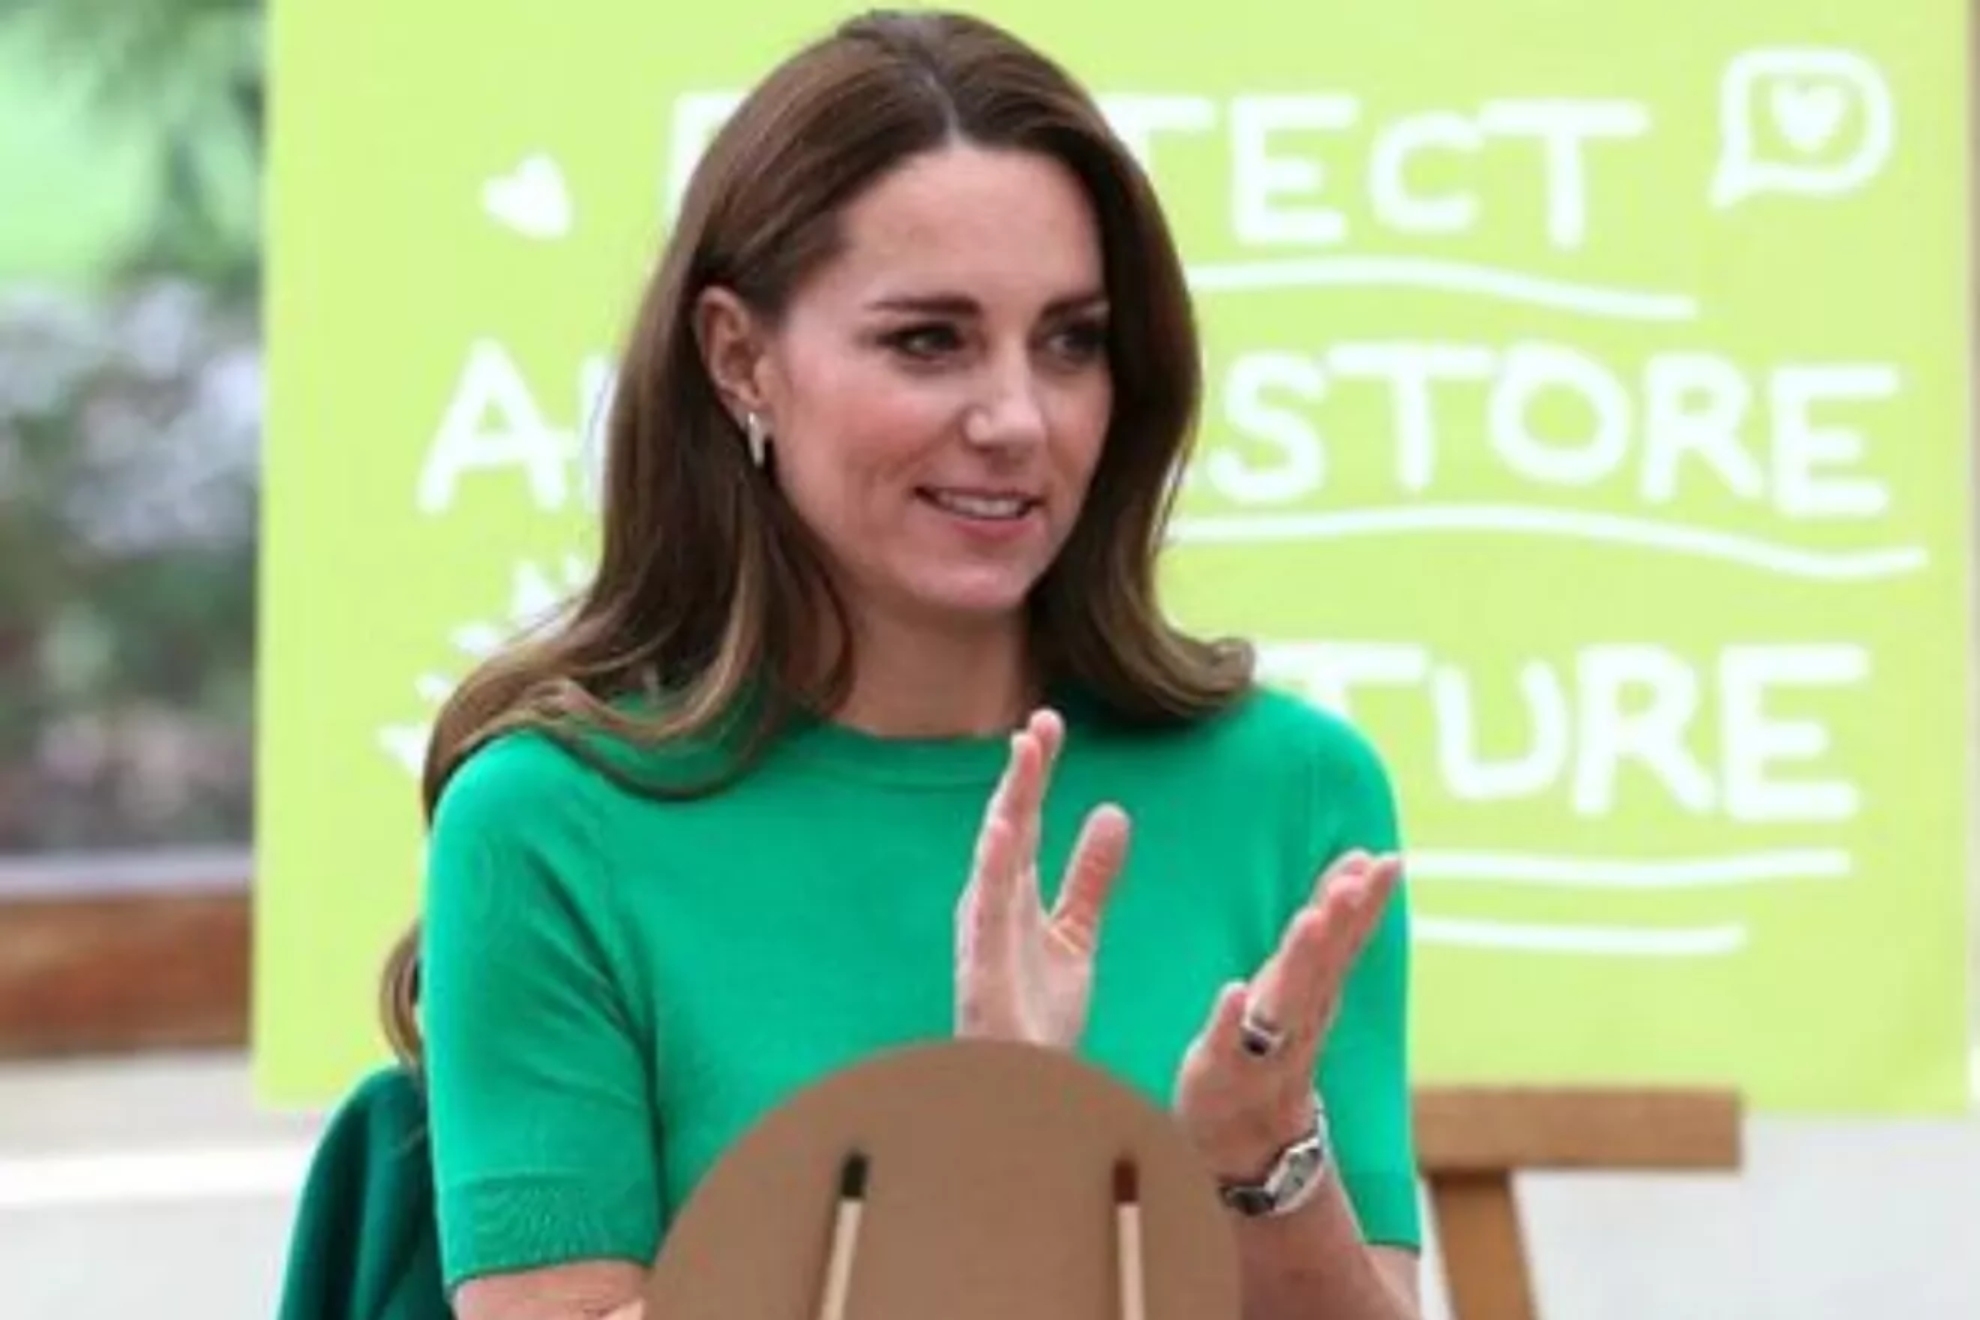 Kate Middleton at a public event.